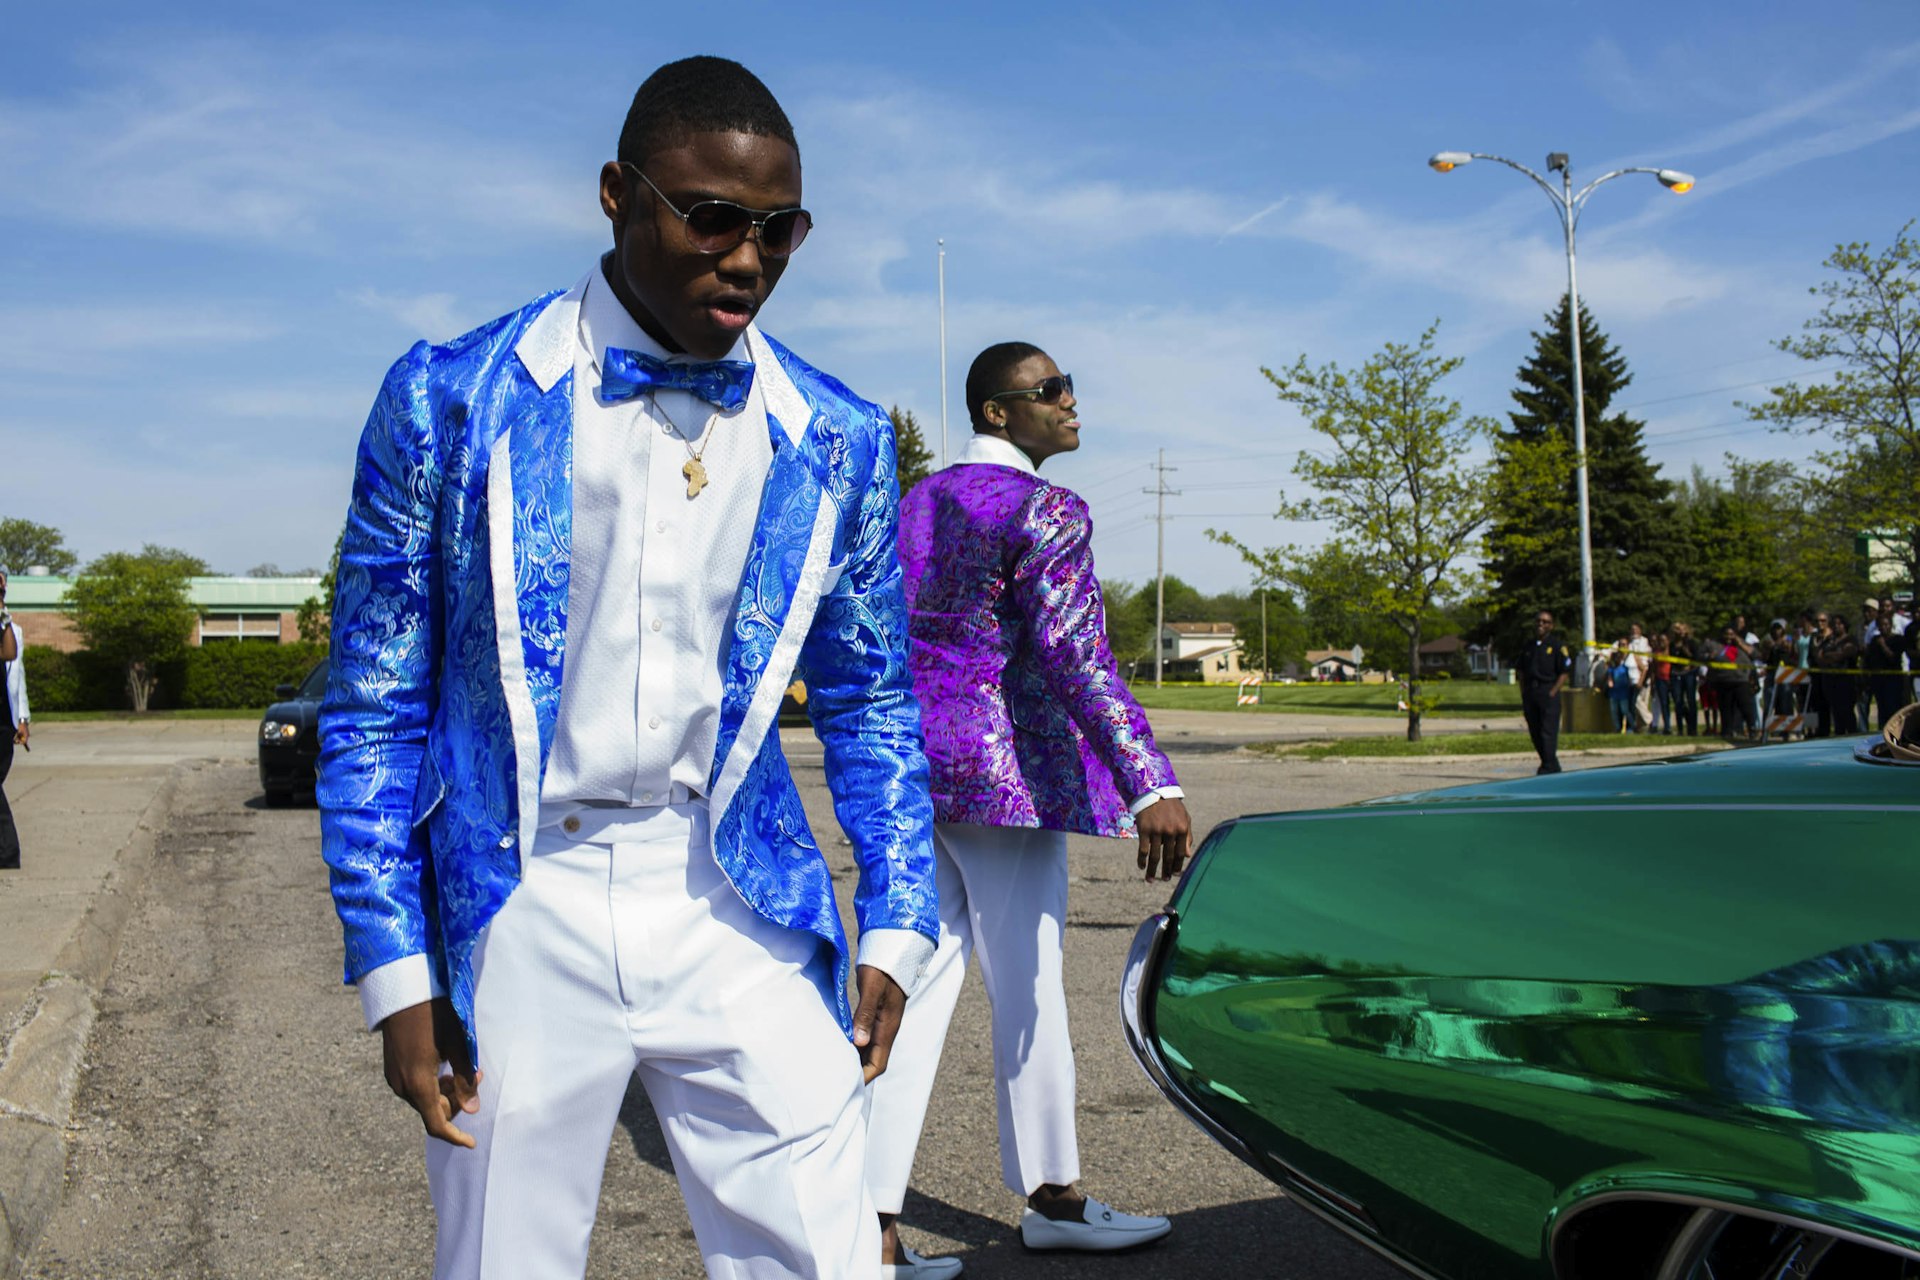 Capturing the glitz, glamour and glory of prom in Flint